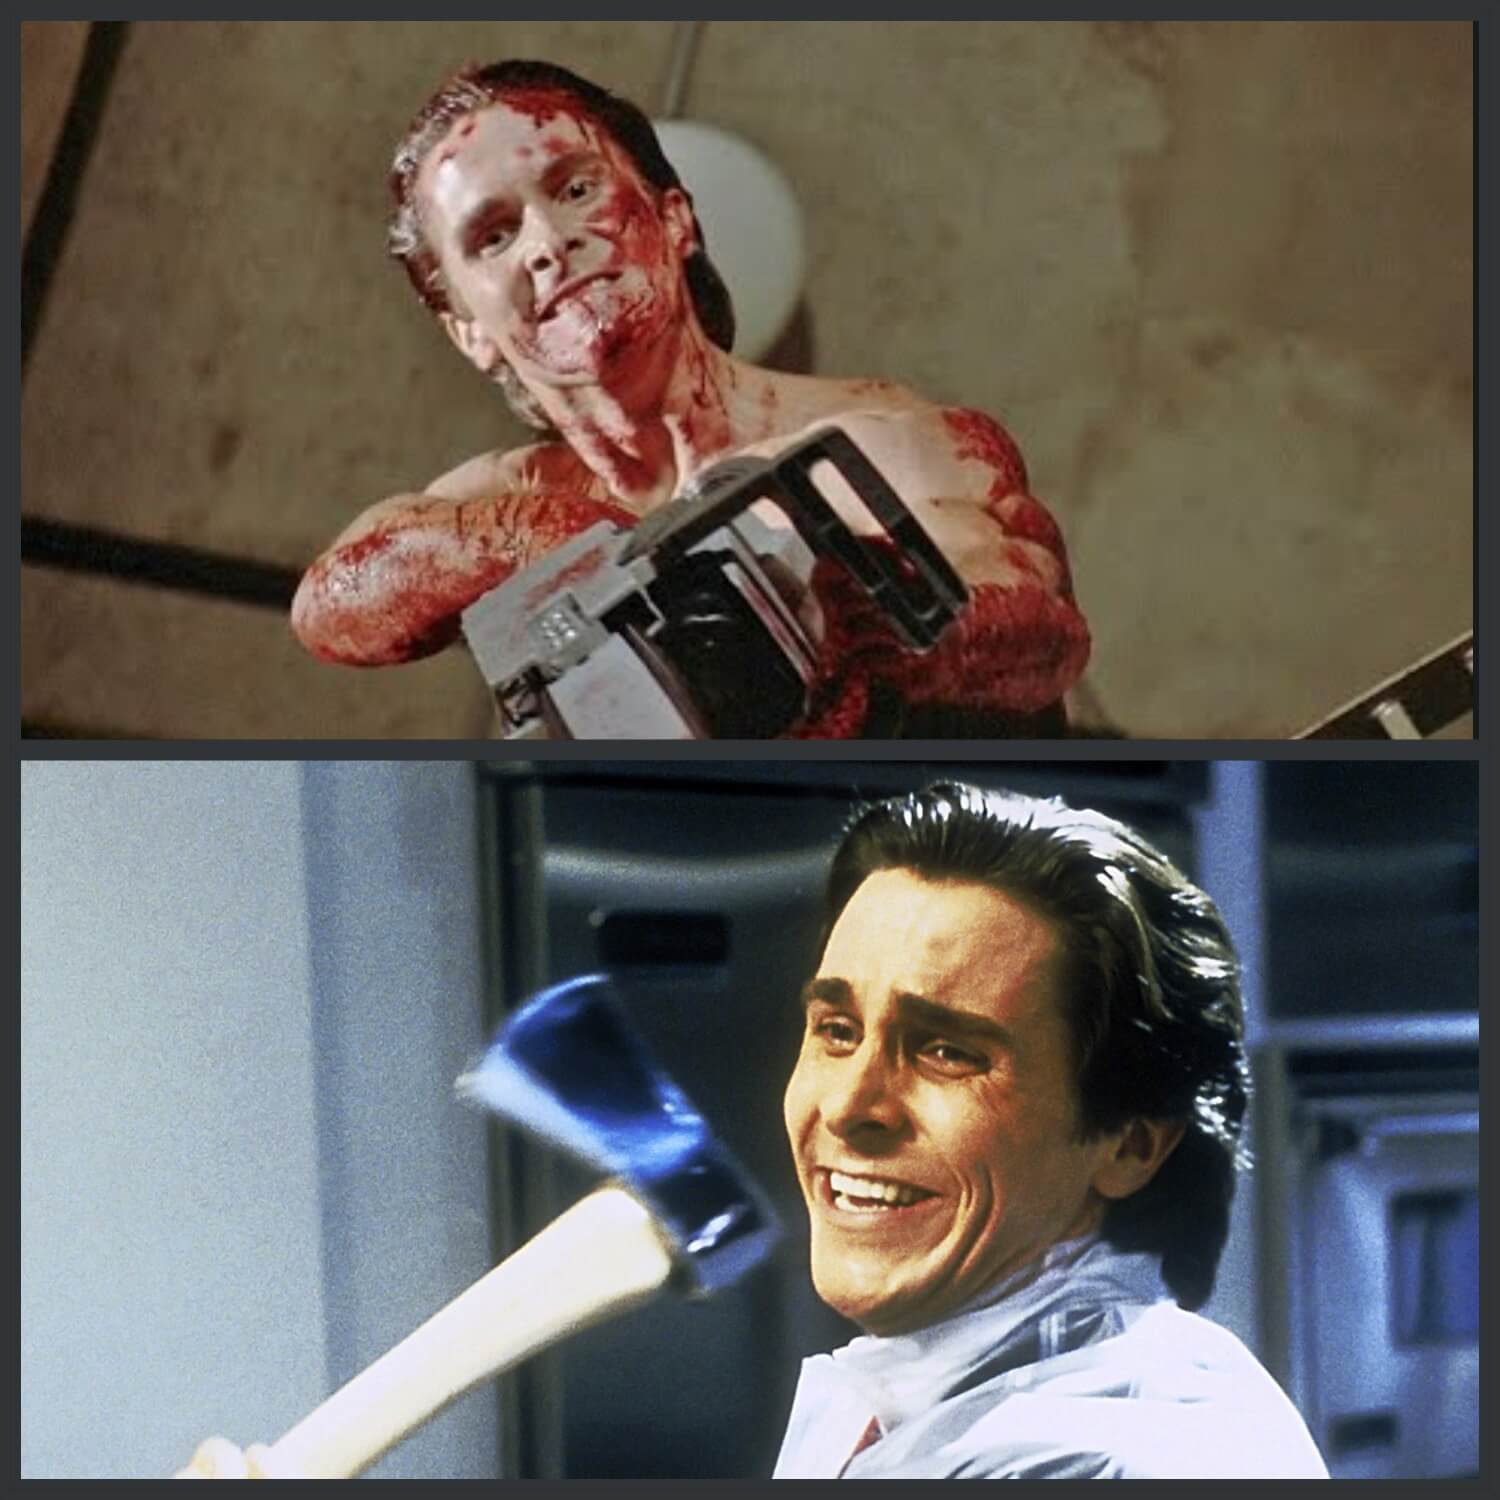 Different Patrick Bateman in Different Situations